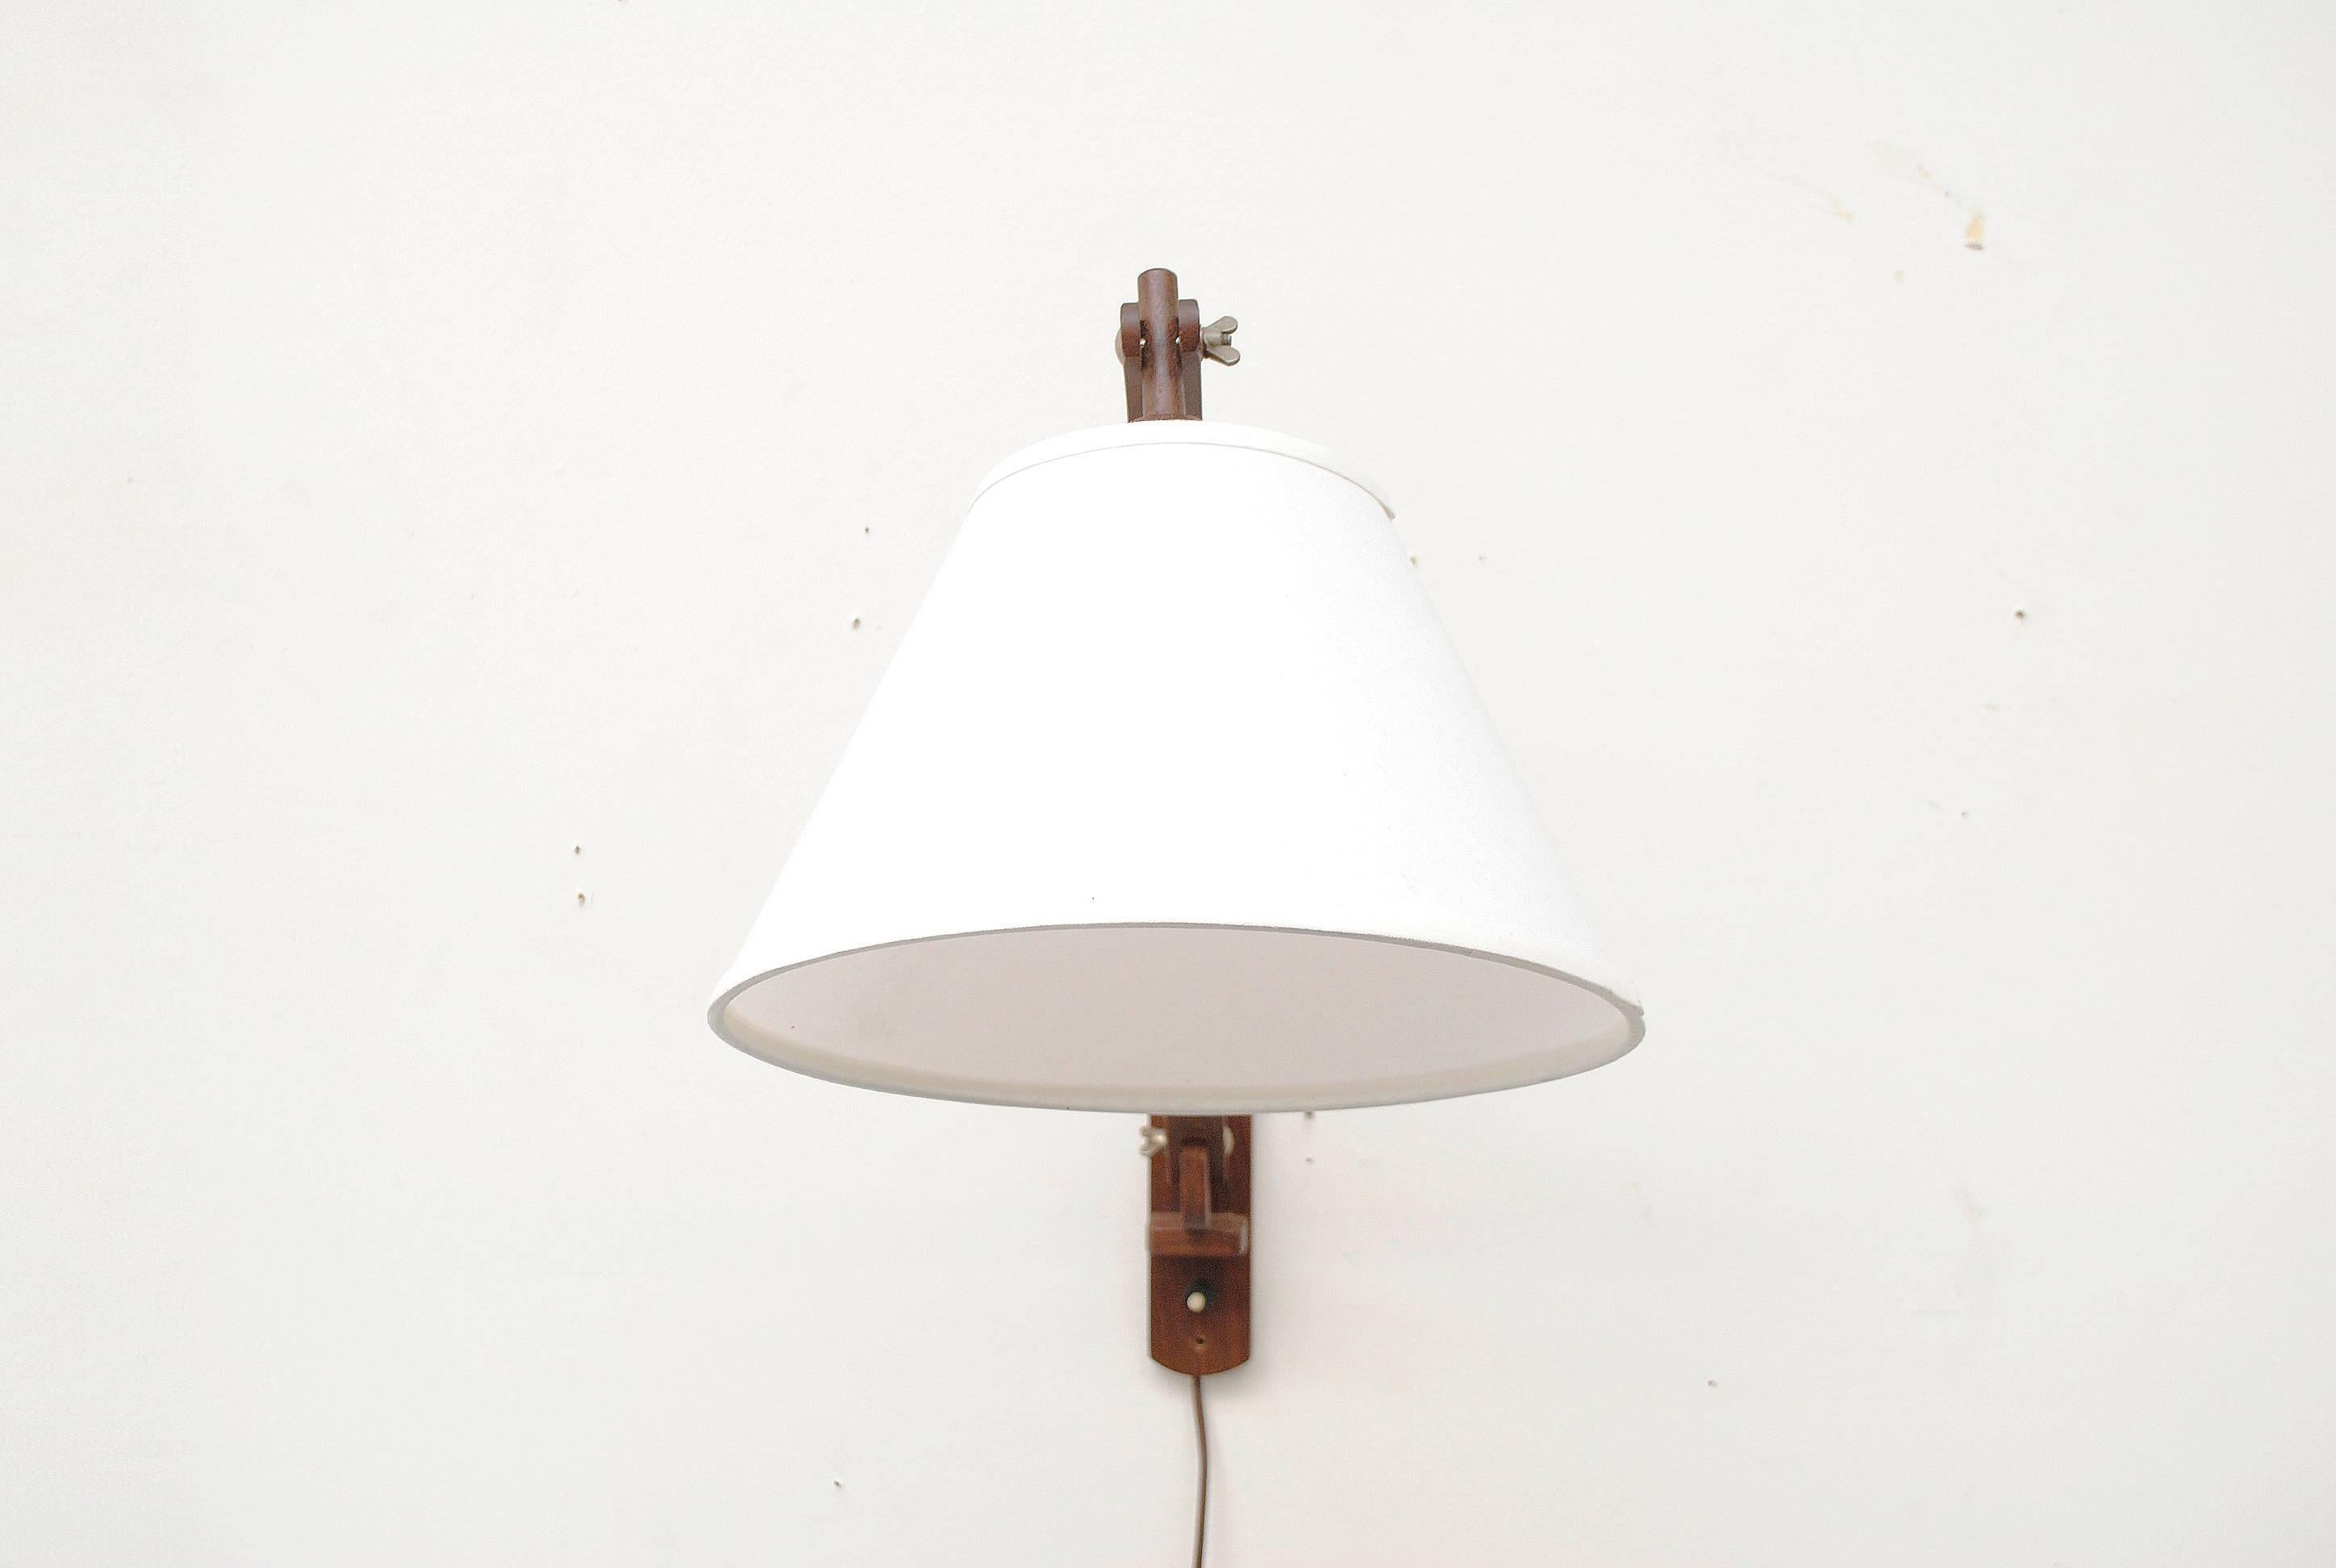 Teak swan neck wall lamp with adjustable positioning. Newly made white linen cone shade. Teak in good original condition.